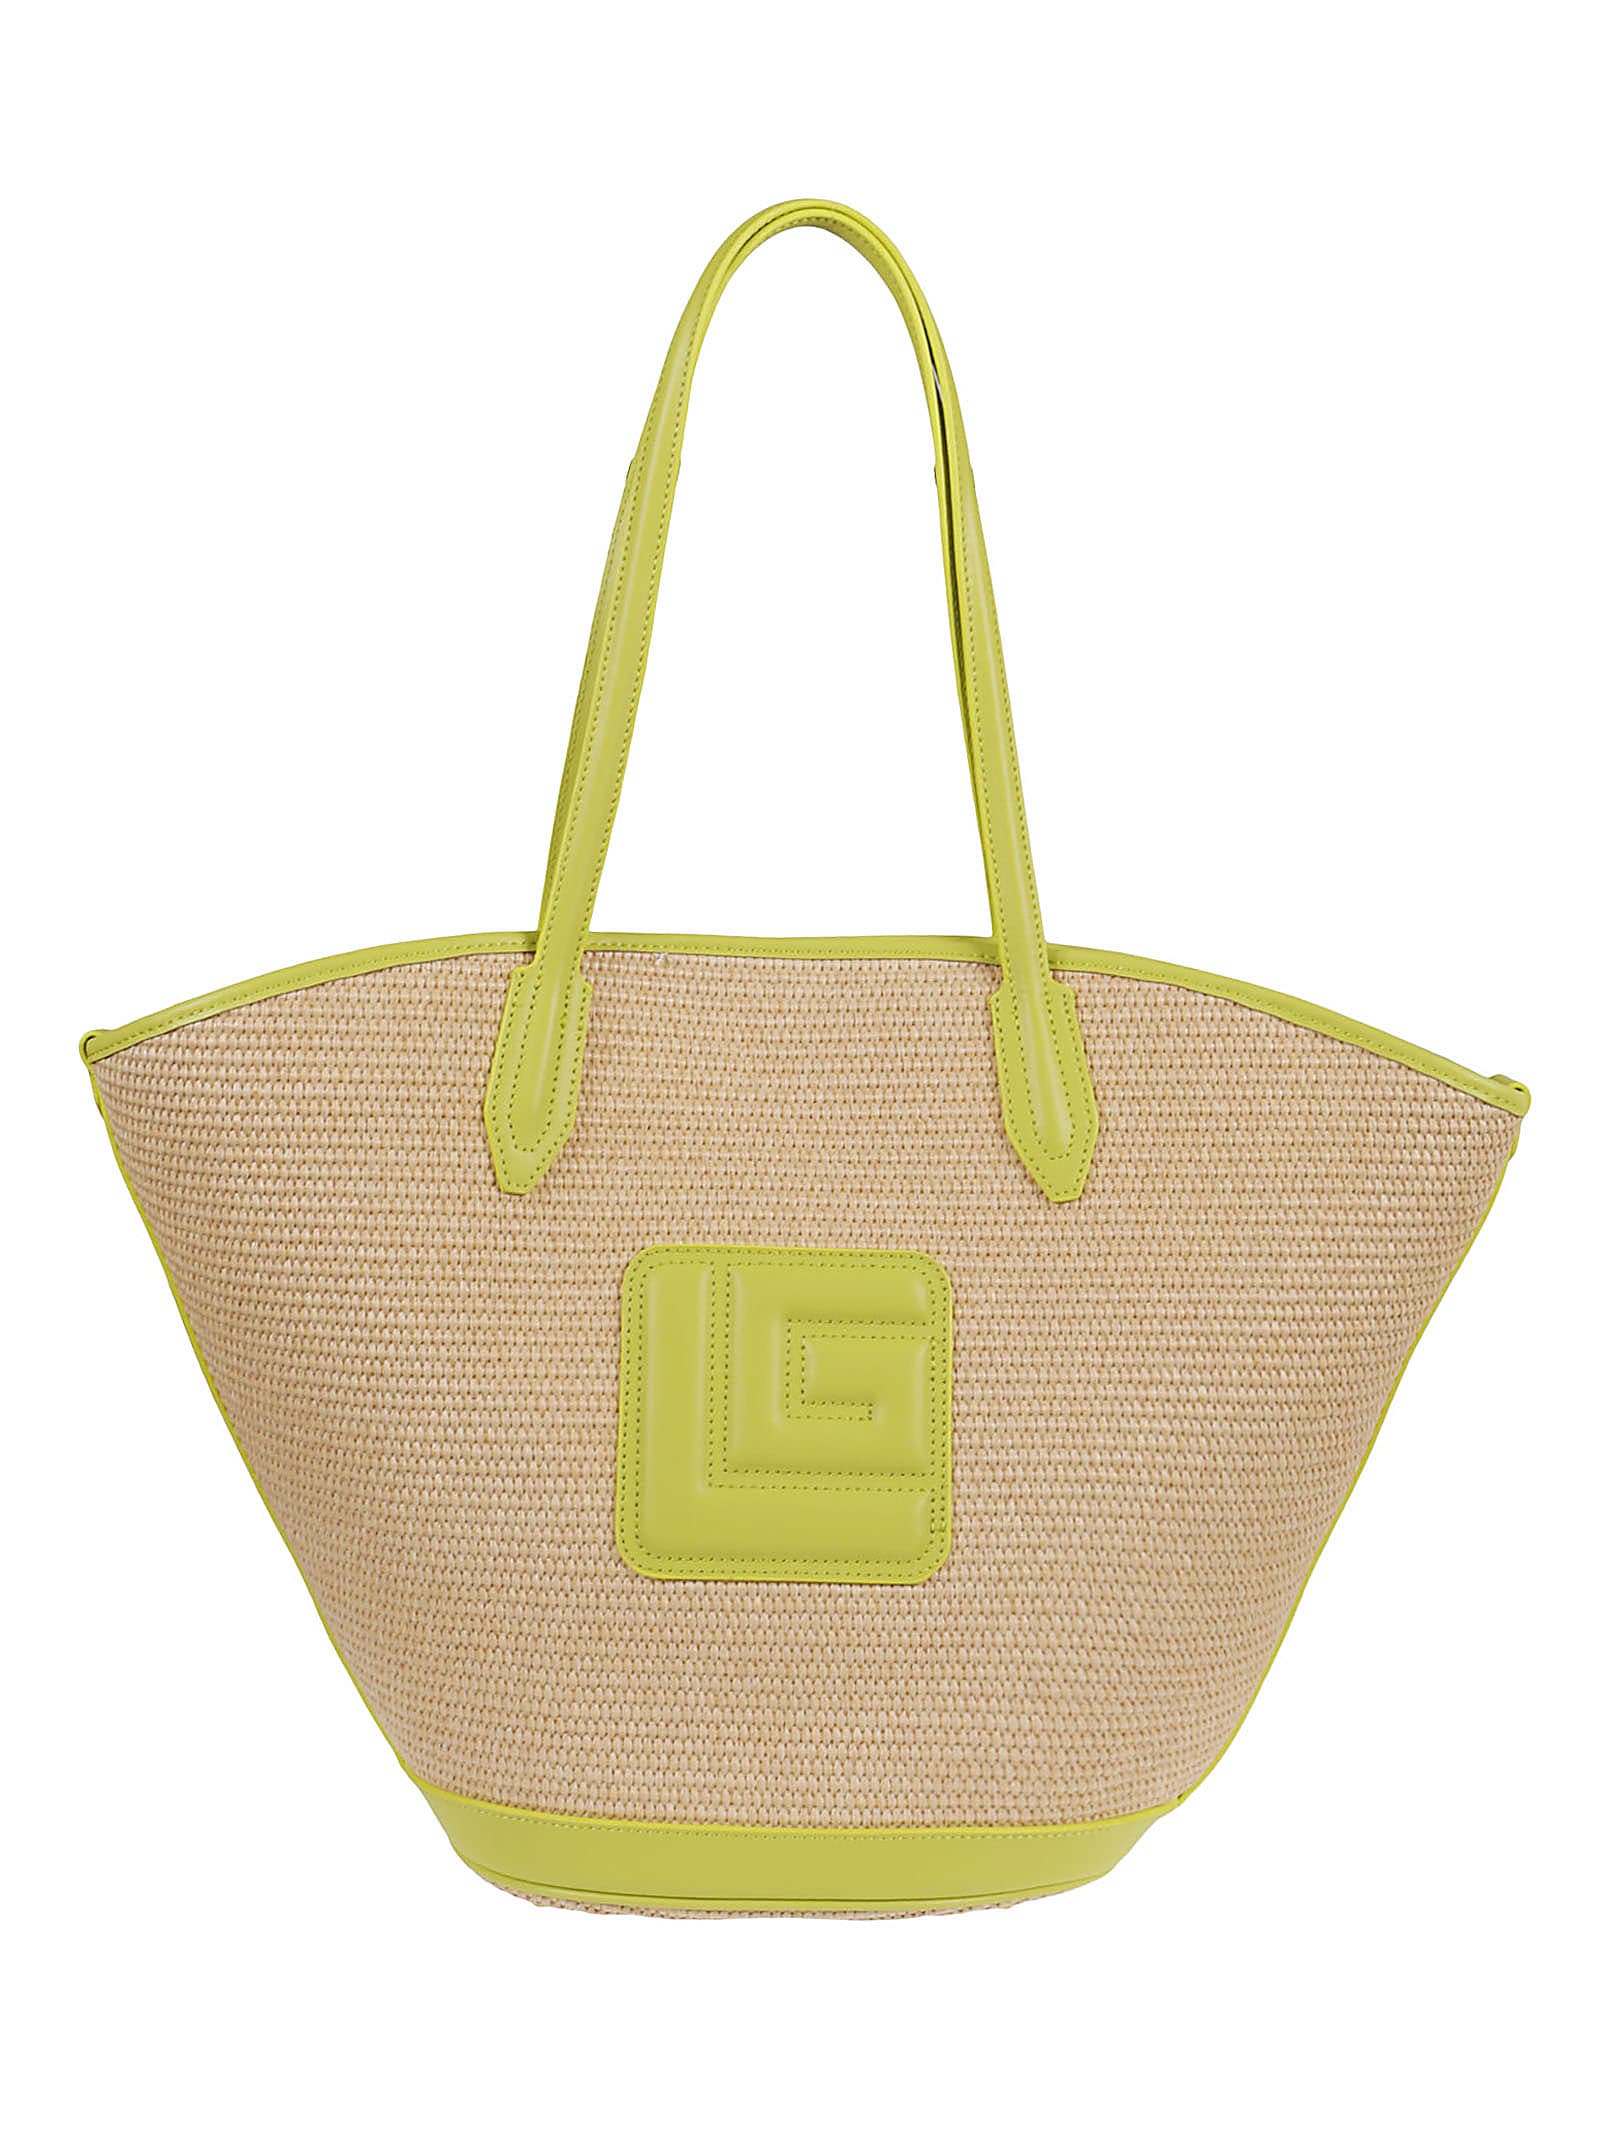 Guy Laroche Large Bag In Natural/lime